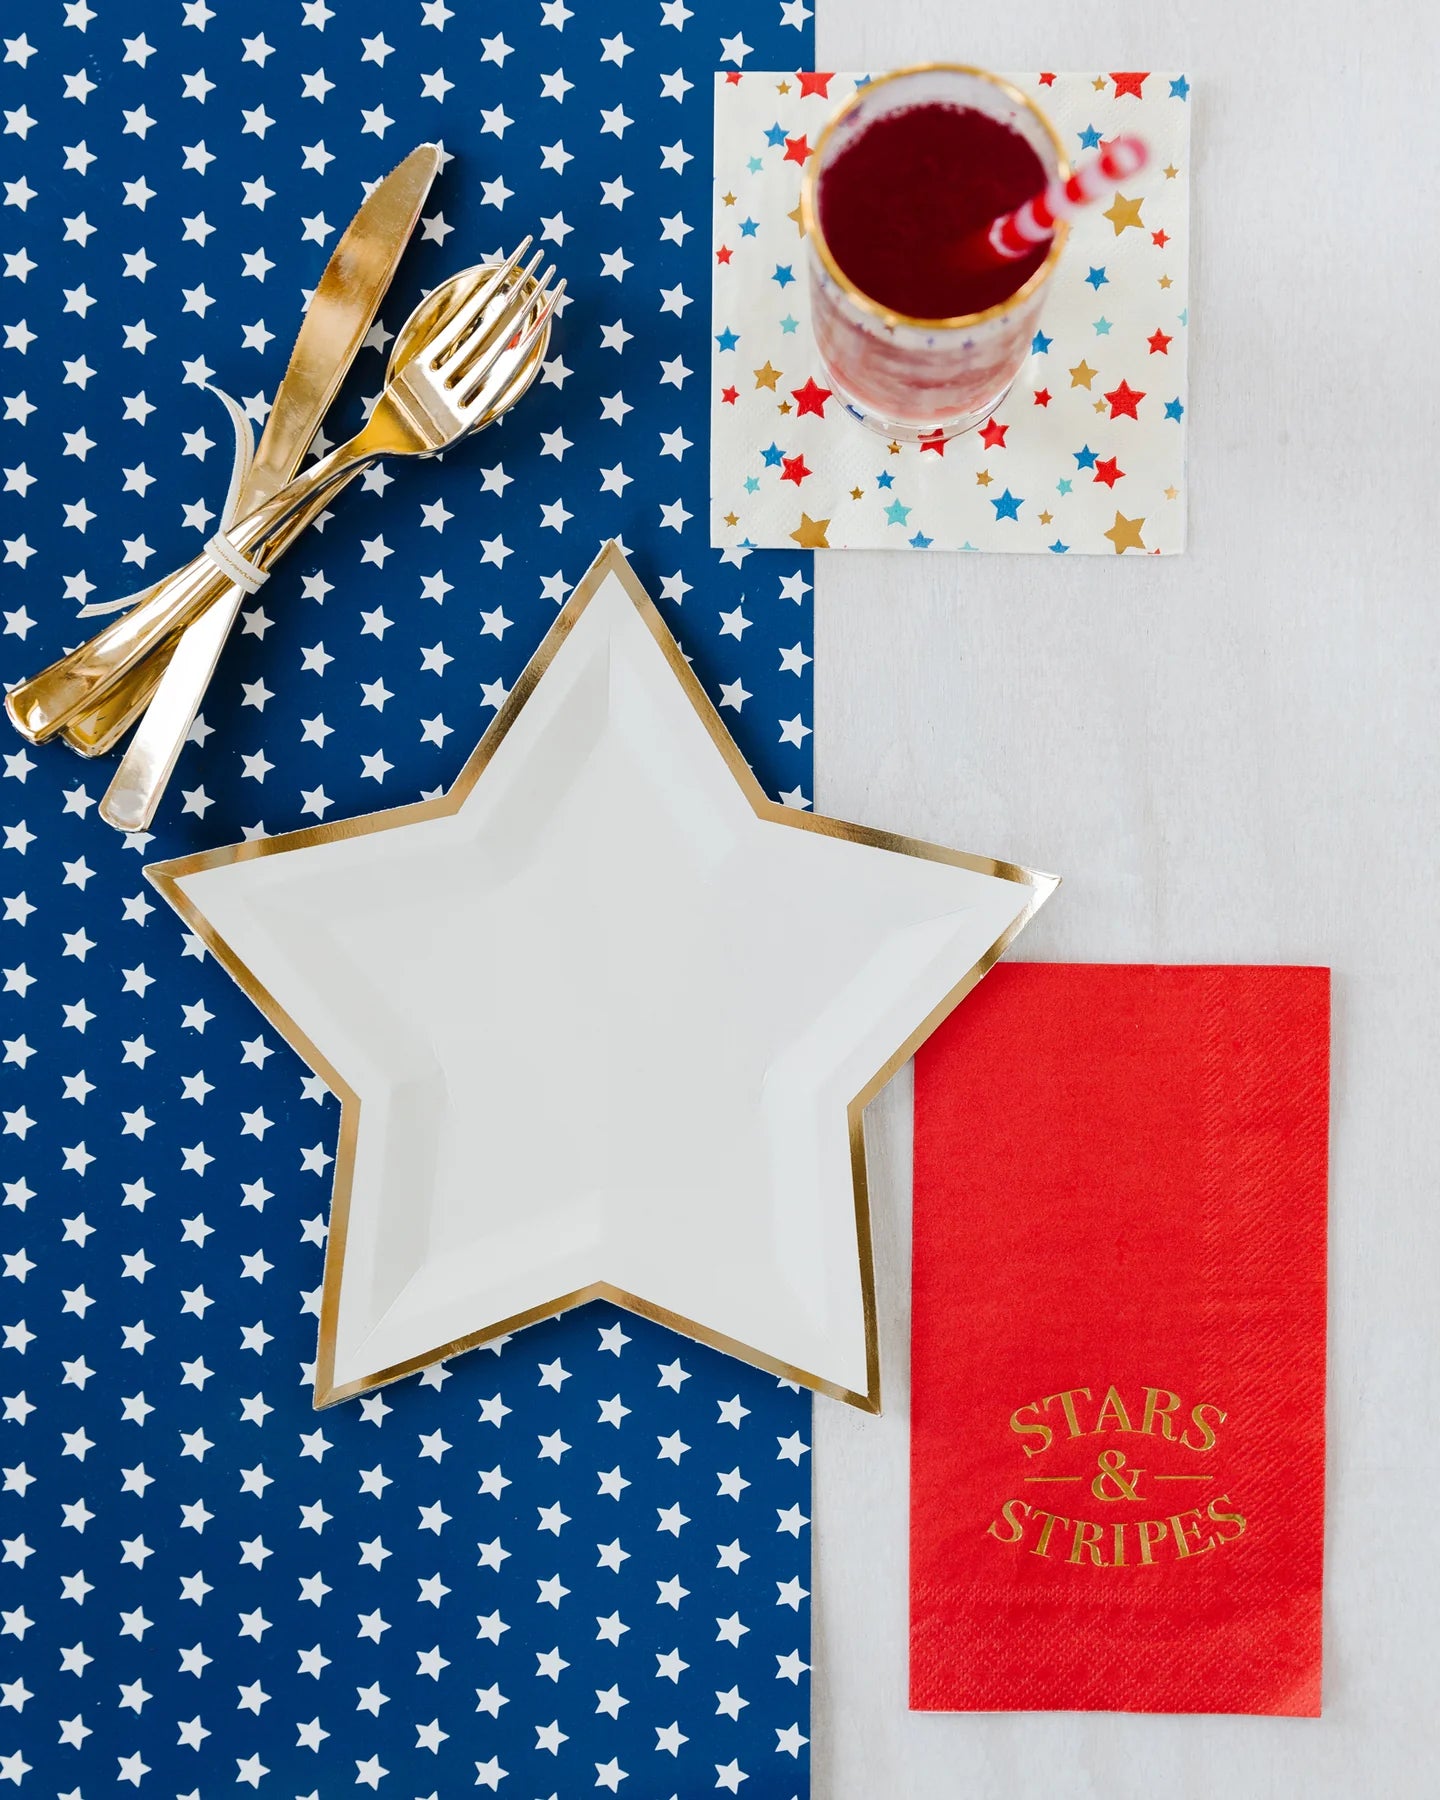 Shaped Plate: Cream & Gold Foiled Star